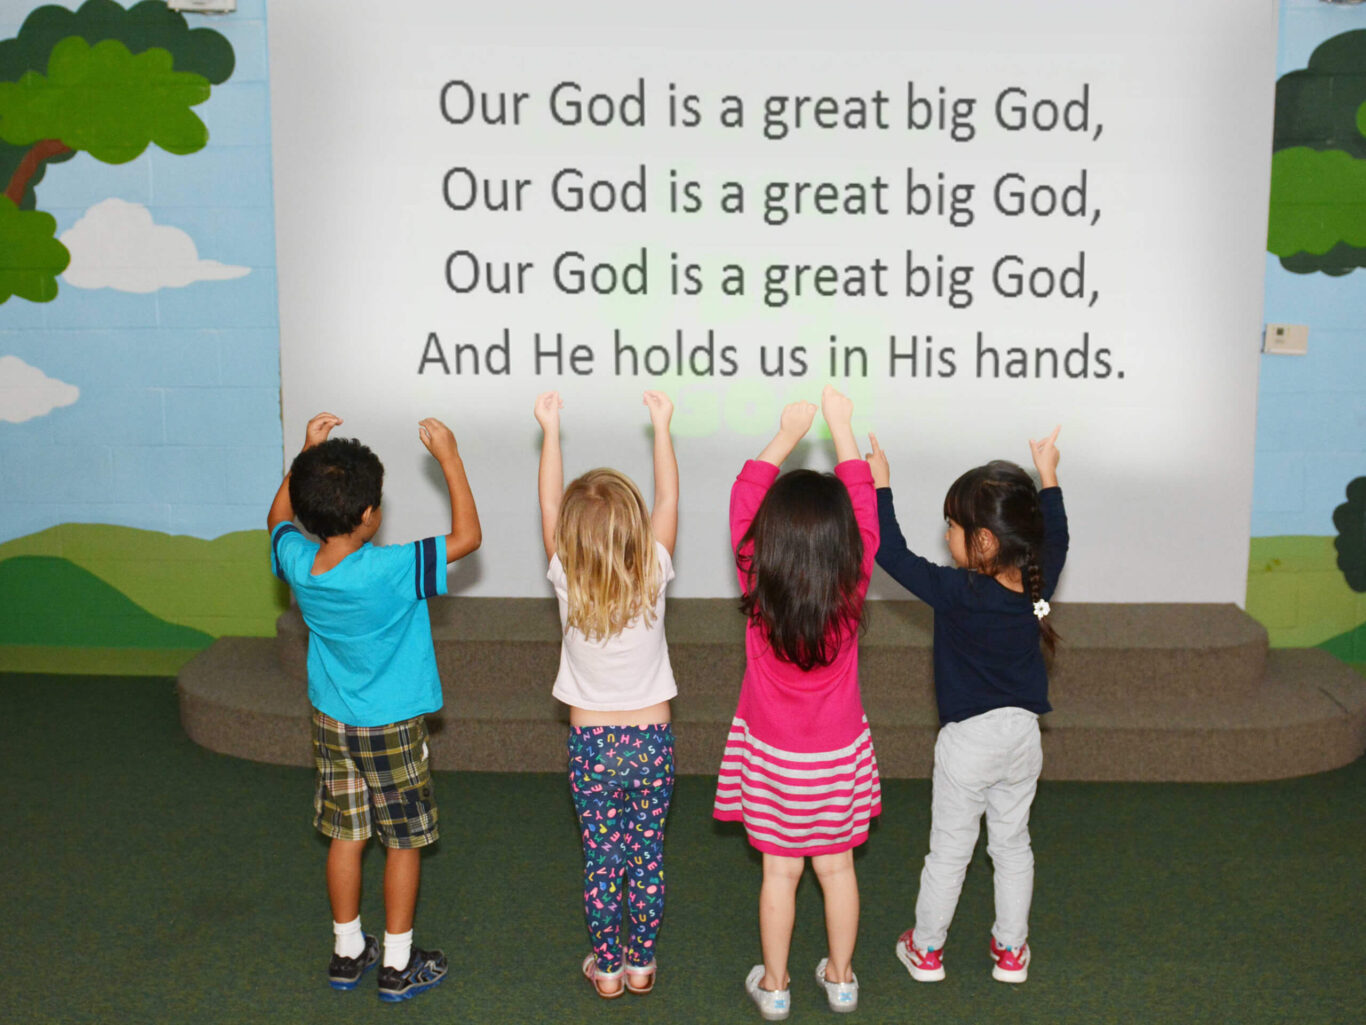 Our god is a great god, especially for preschoolers.